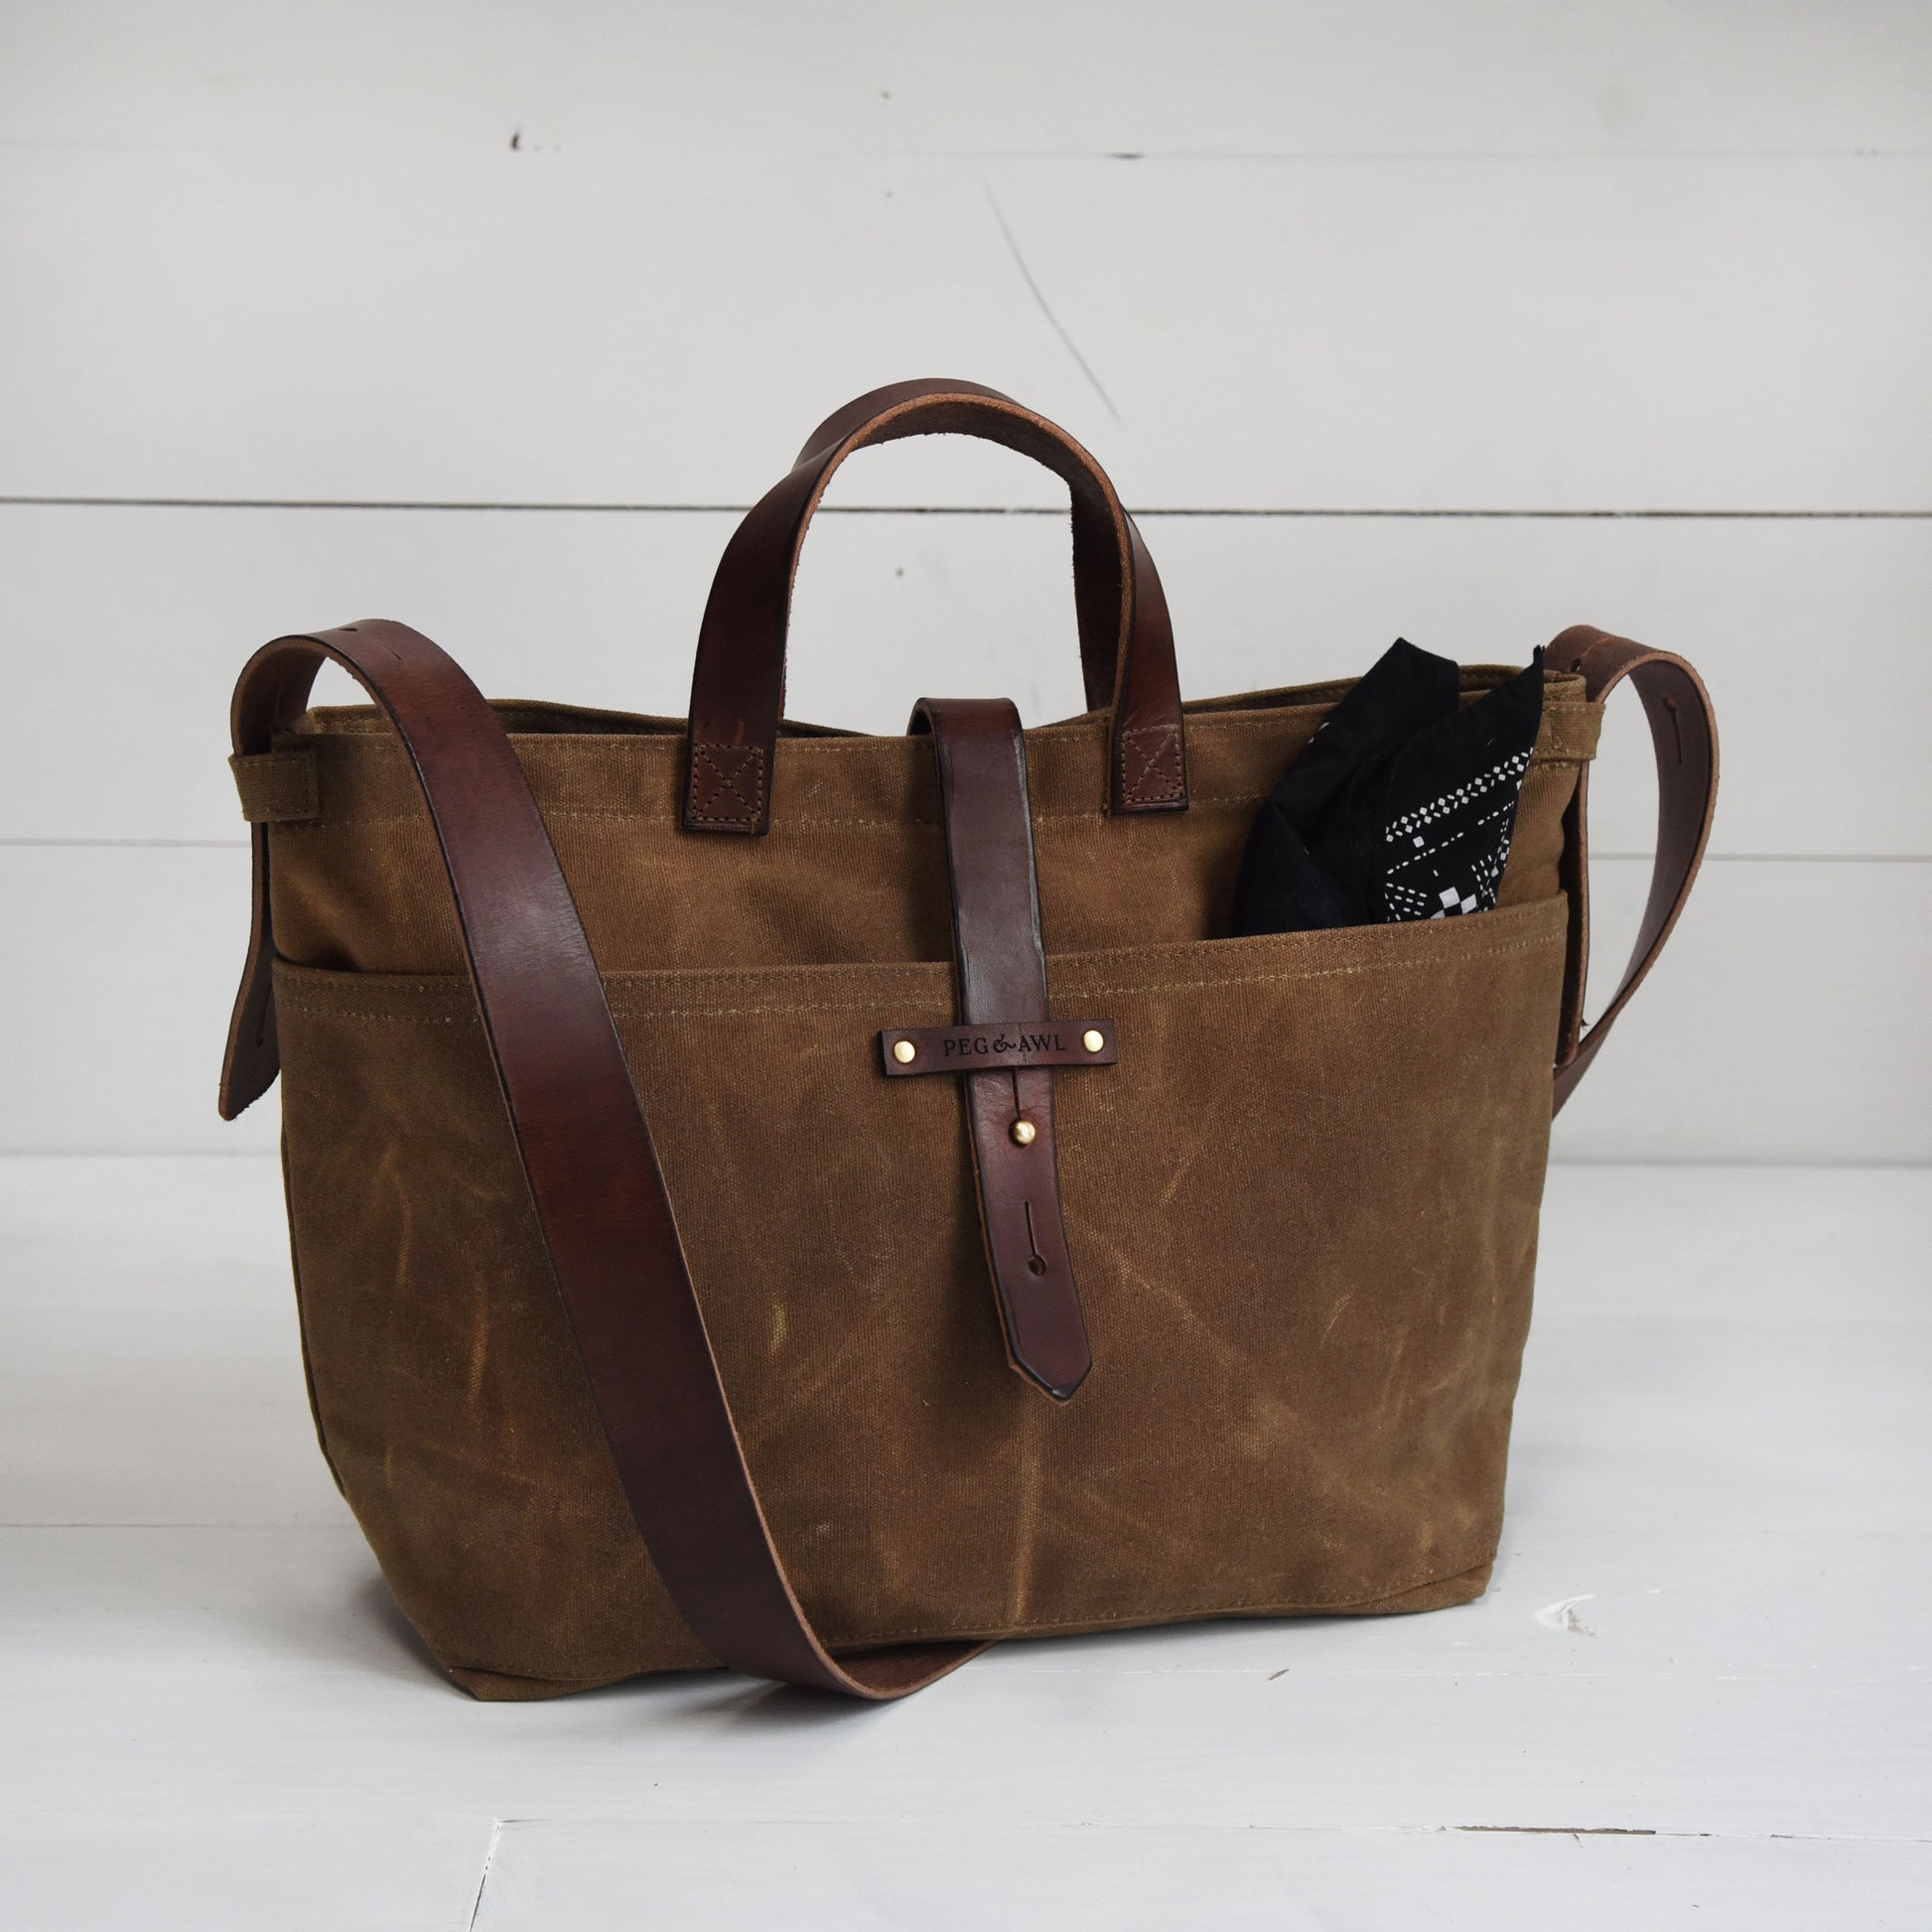 Messenger Bag in Waxed Canvas, Ethically Made